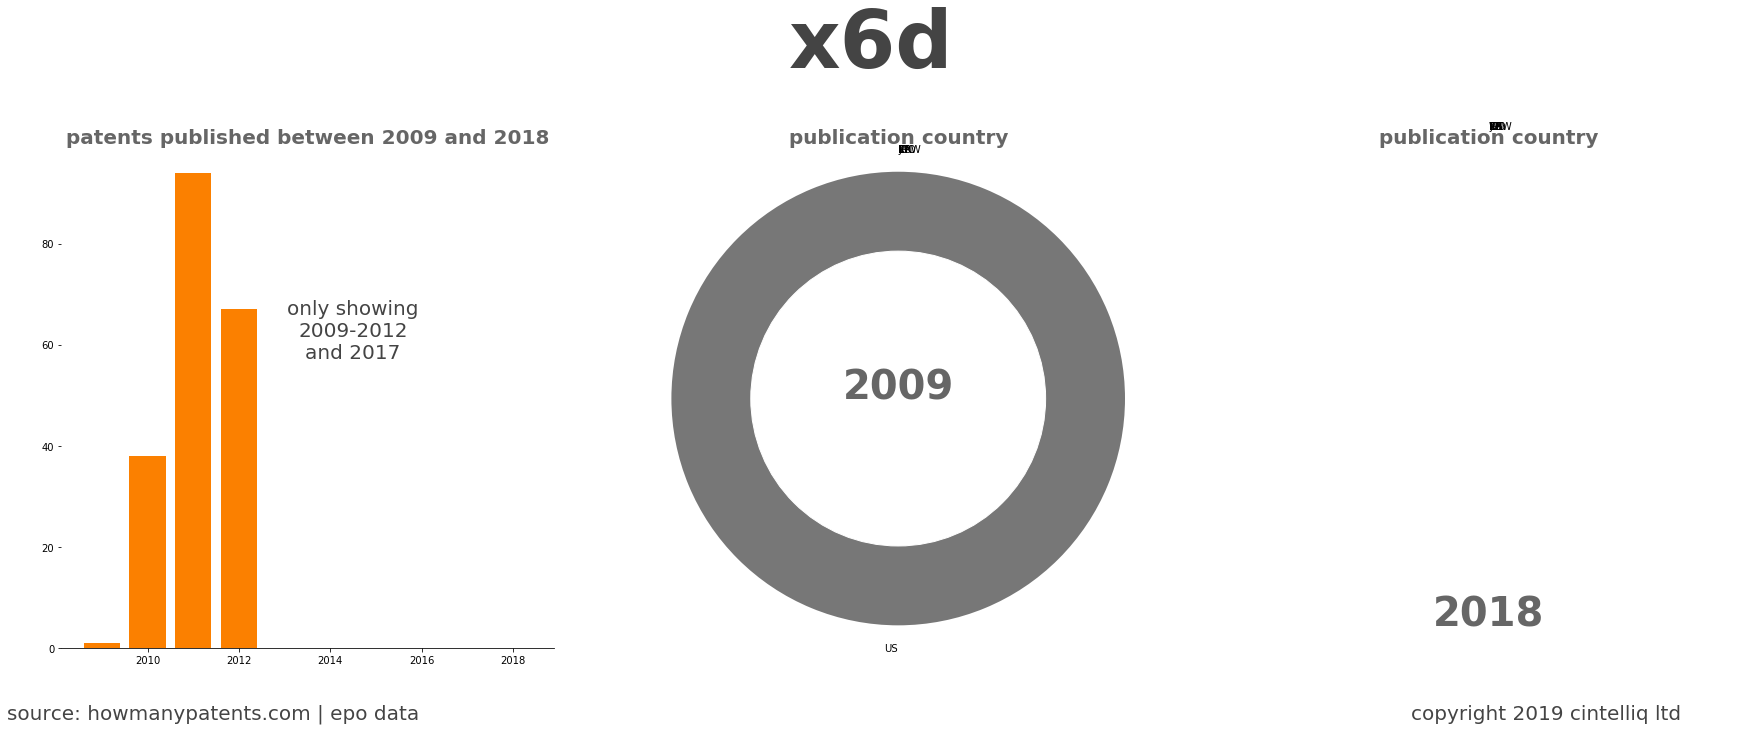 summary of patents for X6D